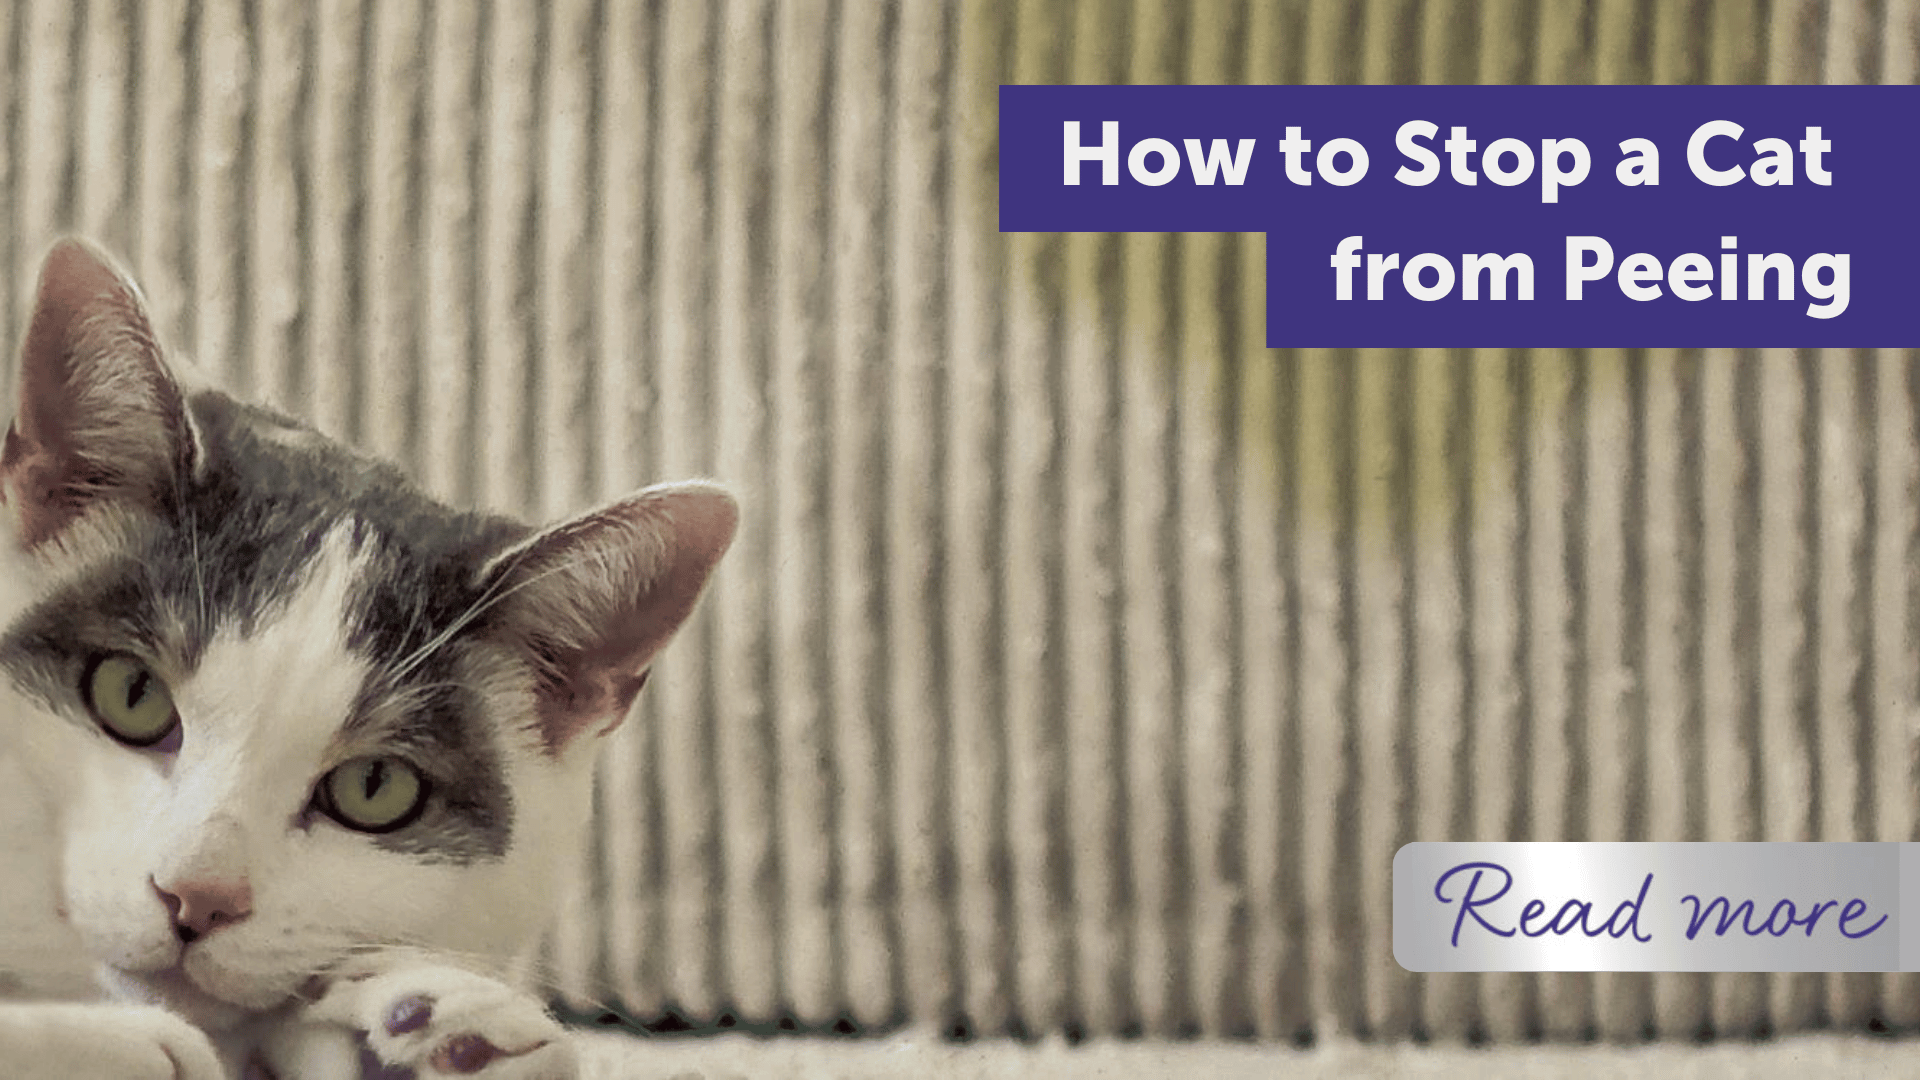 How to Stop a Cat from Peeing Indoors